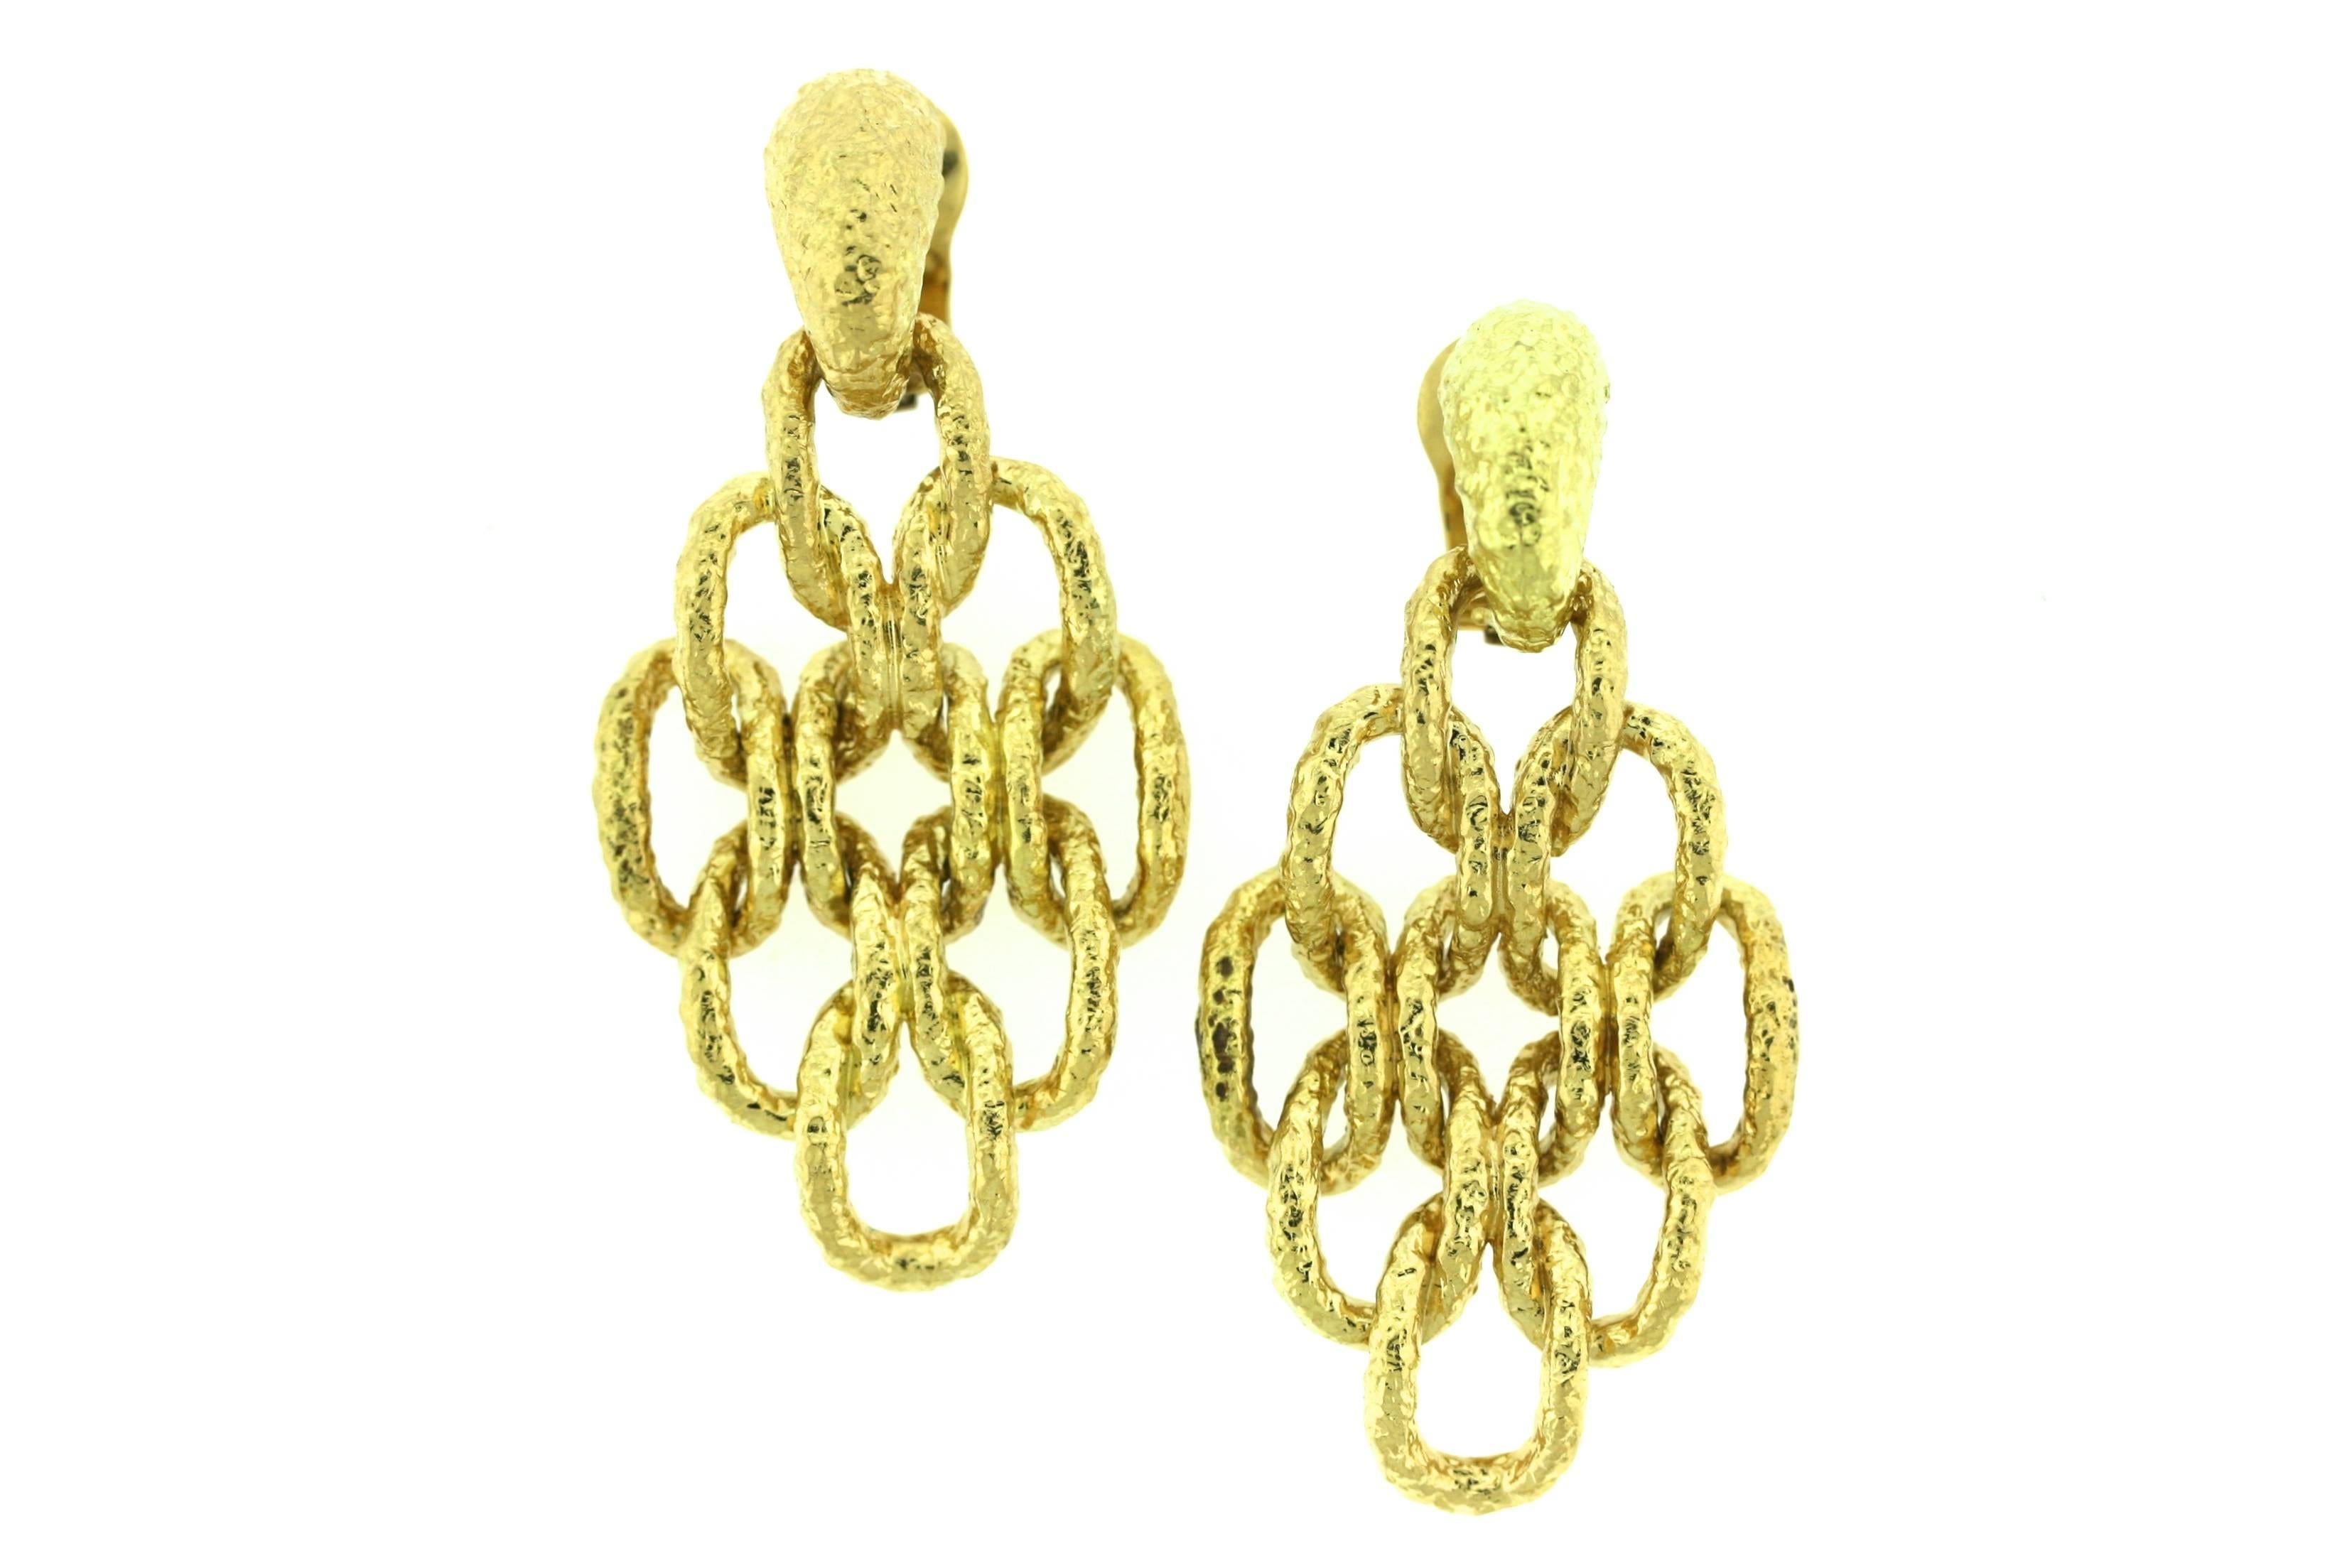 Van Cleef & Arpels Paris 18k textured gold ear clips designed as a hammered gold top suspending nine articulated open oval links. A stylish and versatile 1970s day-to-night earring. 2.5